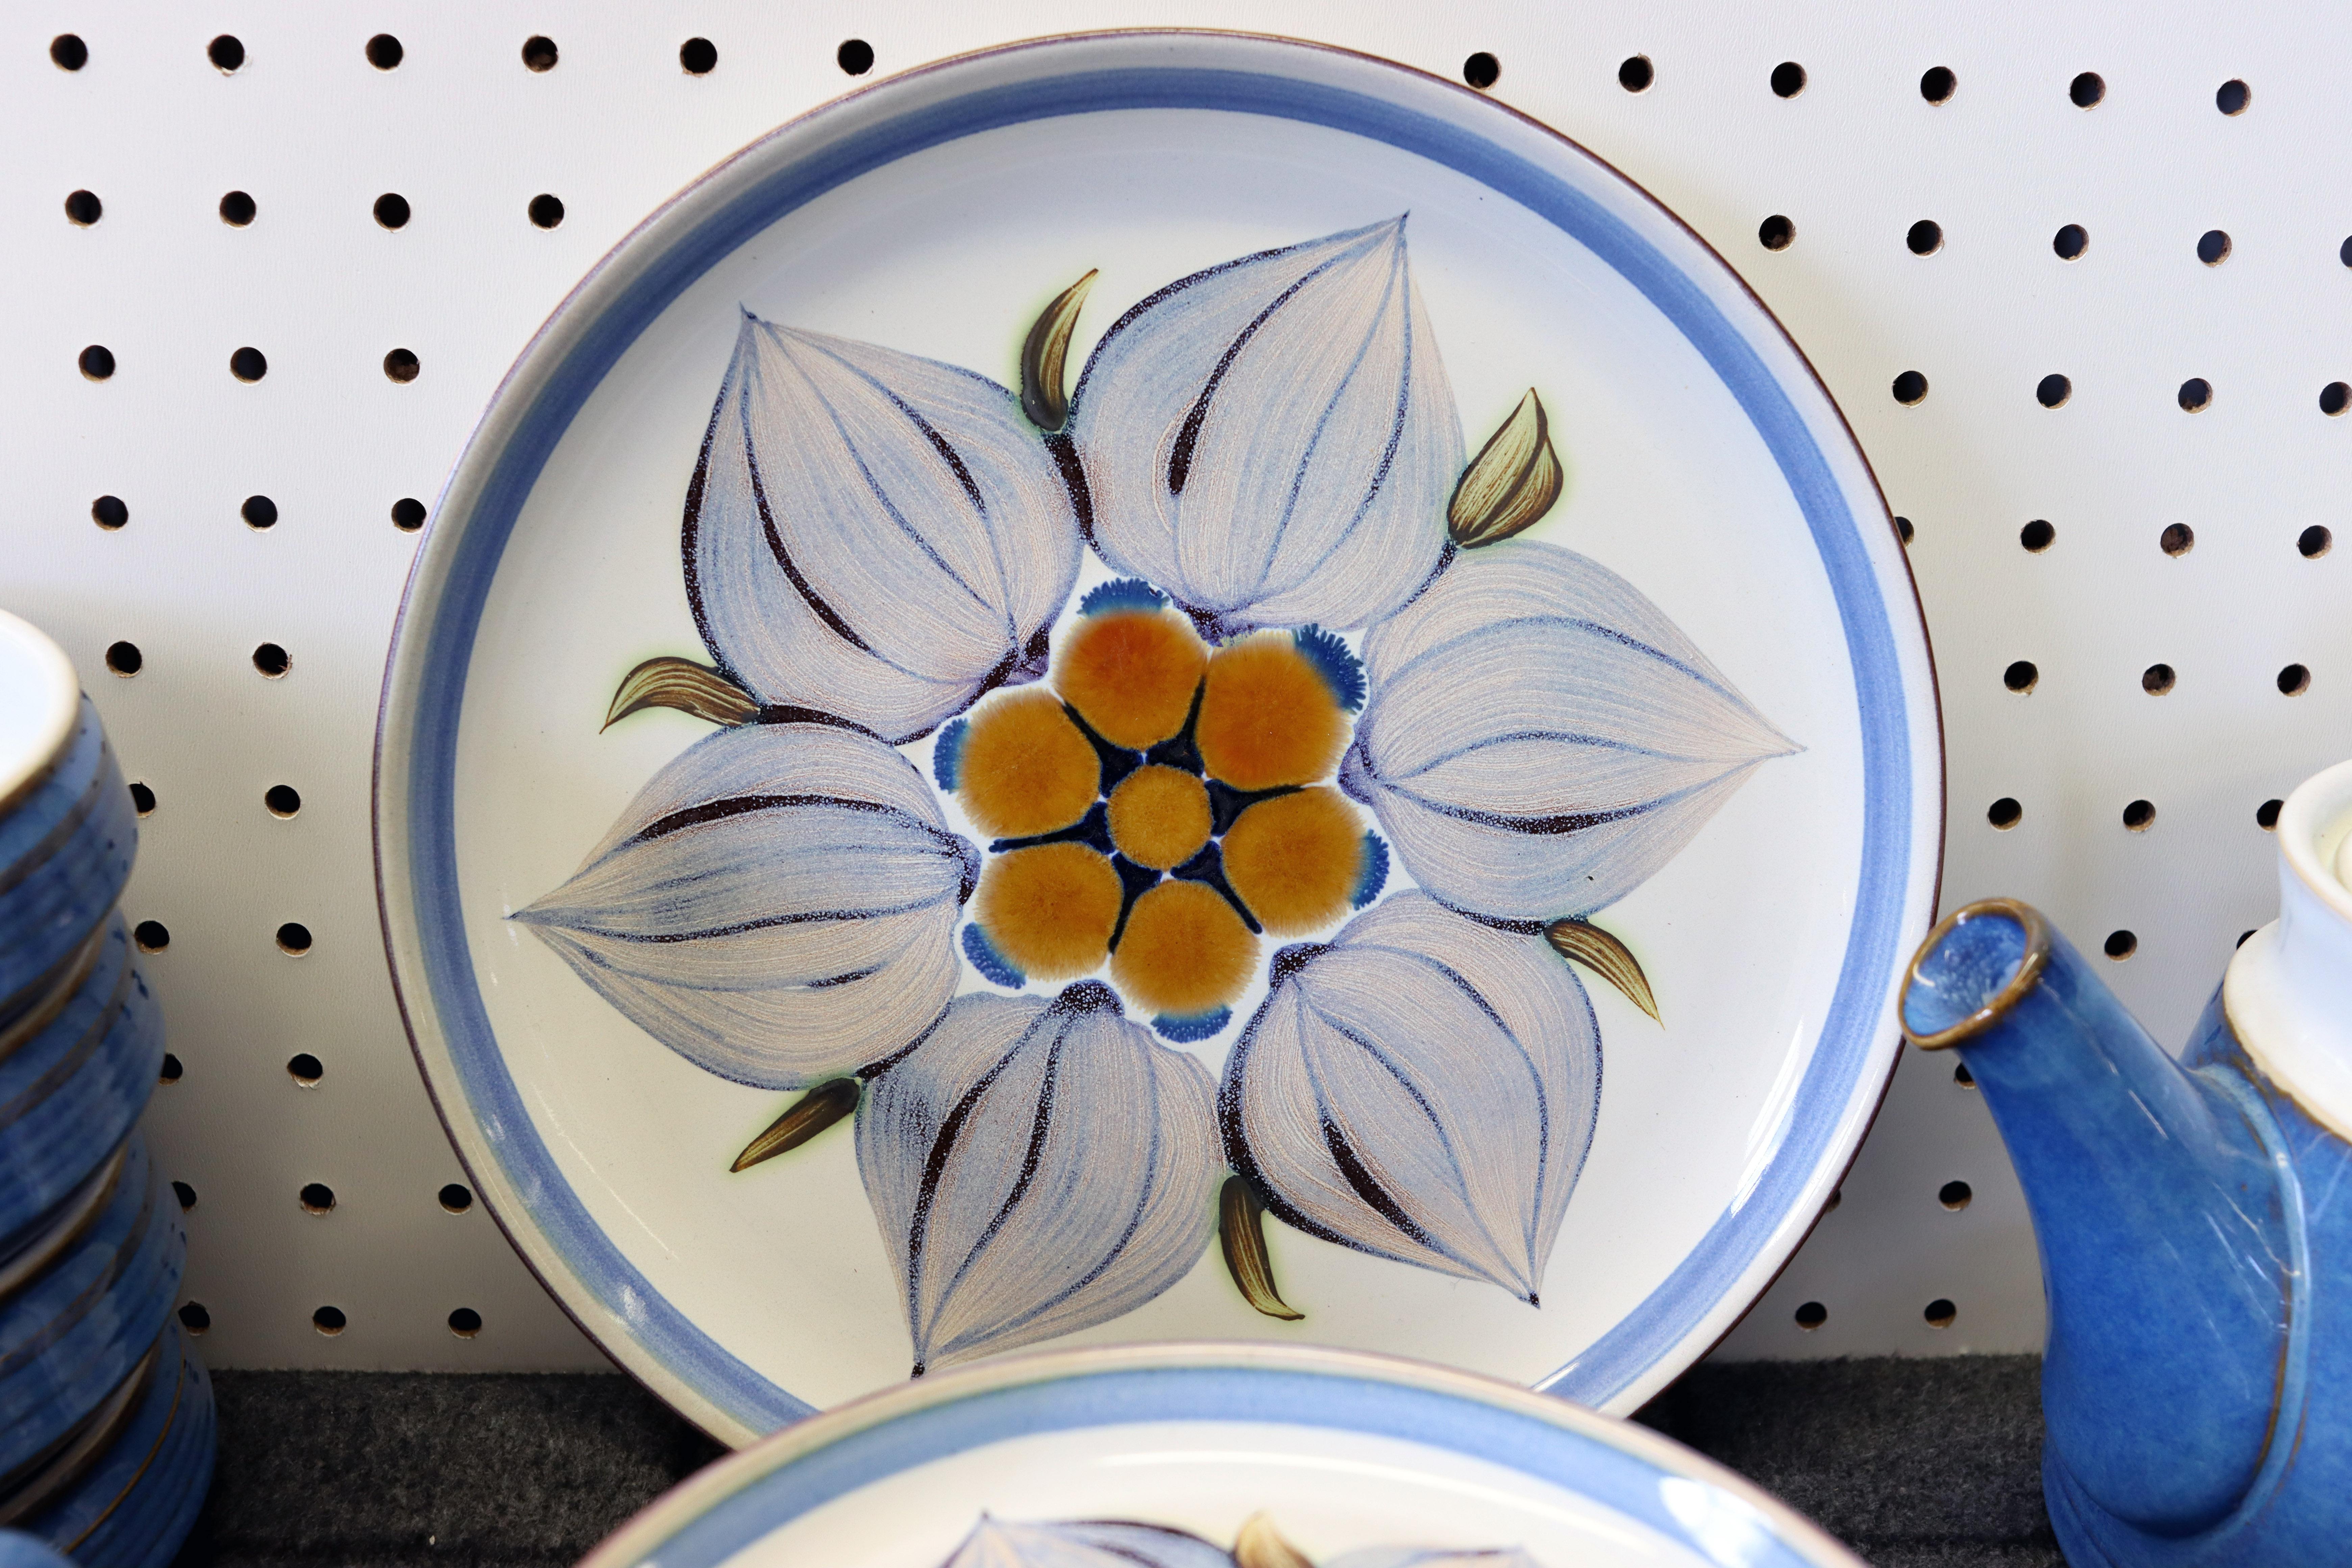 Complete service for four with midcentury flair! This Langley dish set made in England includes everything you need to set the table for family or guests. Offer entree, salad, dessert and post-meal coffee or tea with this 29-piece